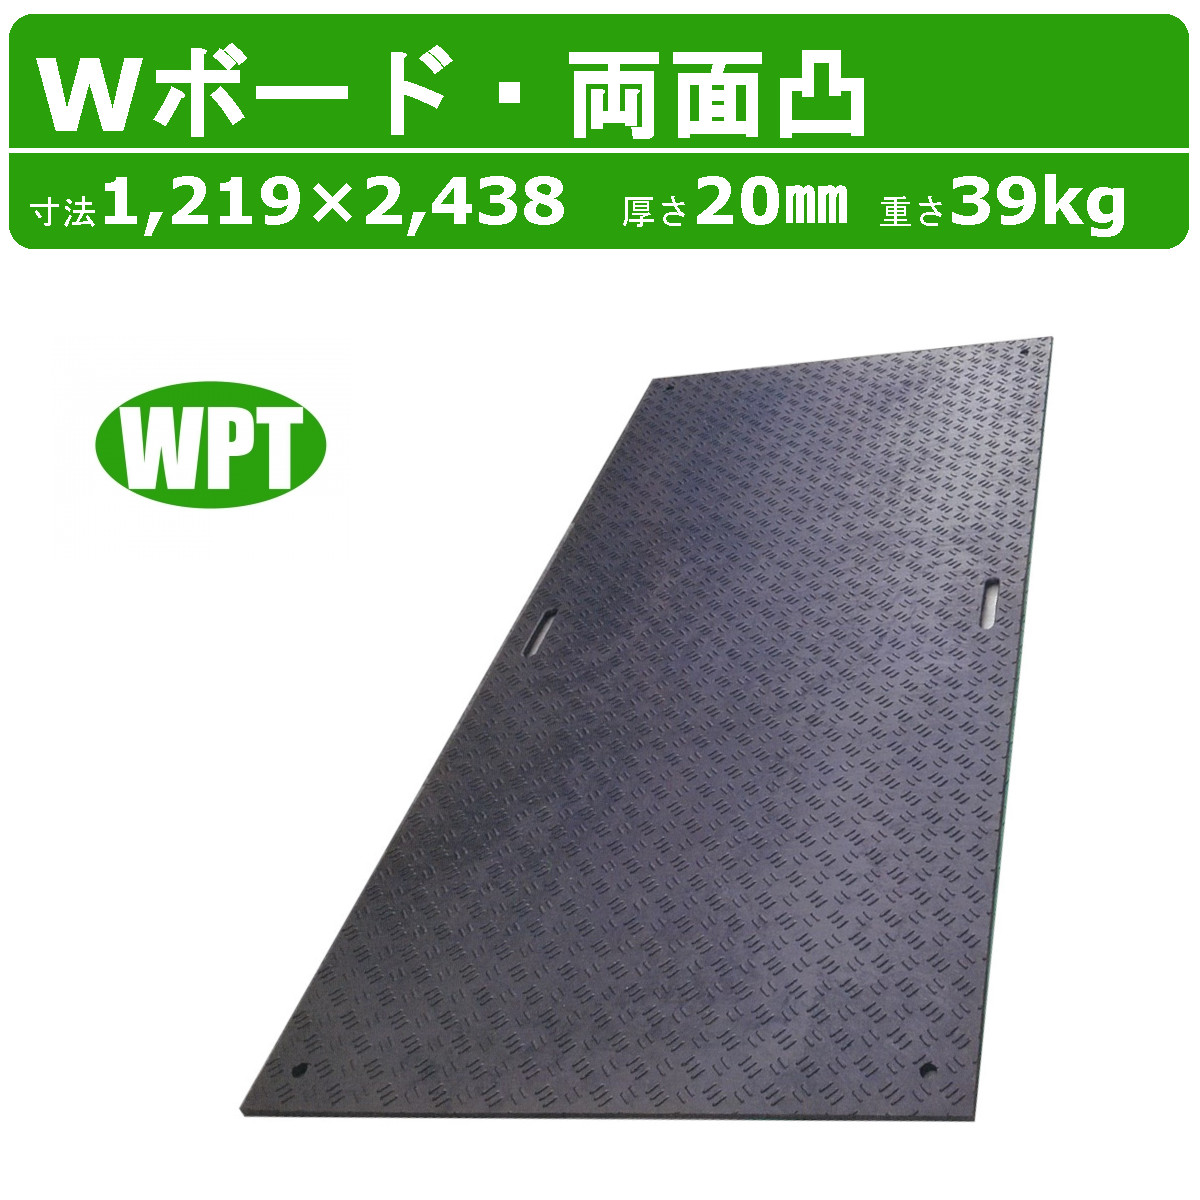 WPT Wボード 4×8尺 厚さ20mm 両面凸 敷板 樹脂製 プラシキ コンパネ 